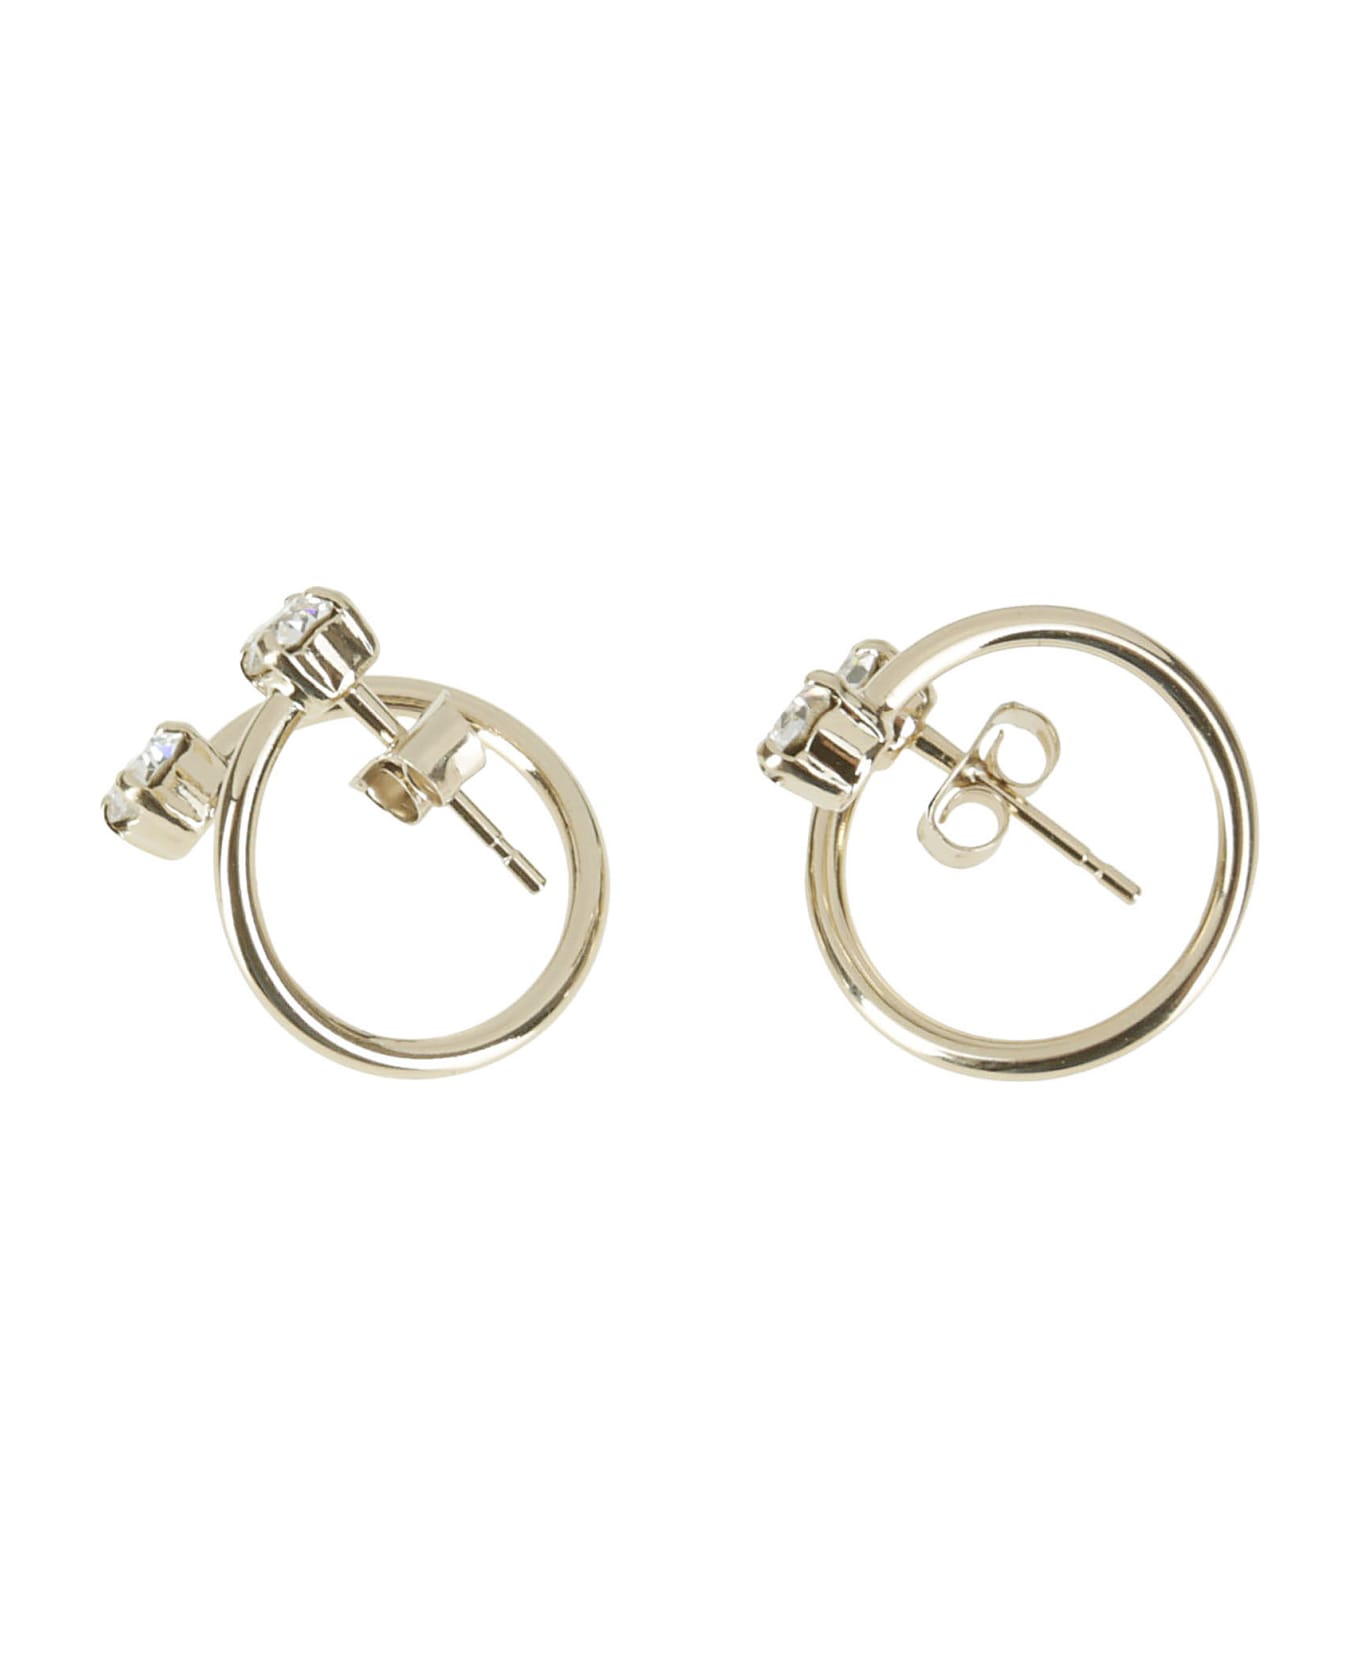 Justine Clenquet Maxine Earrings - CRYSTAL